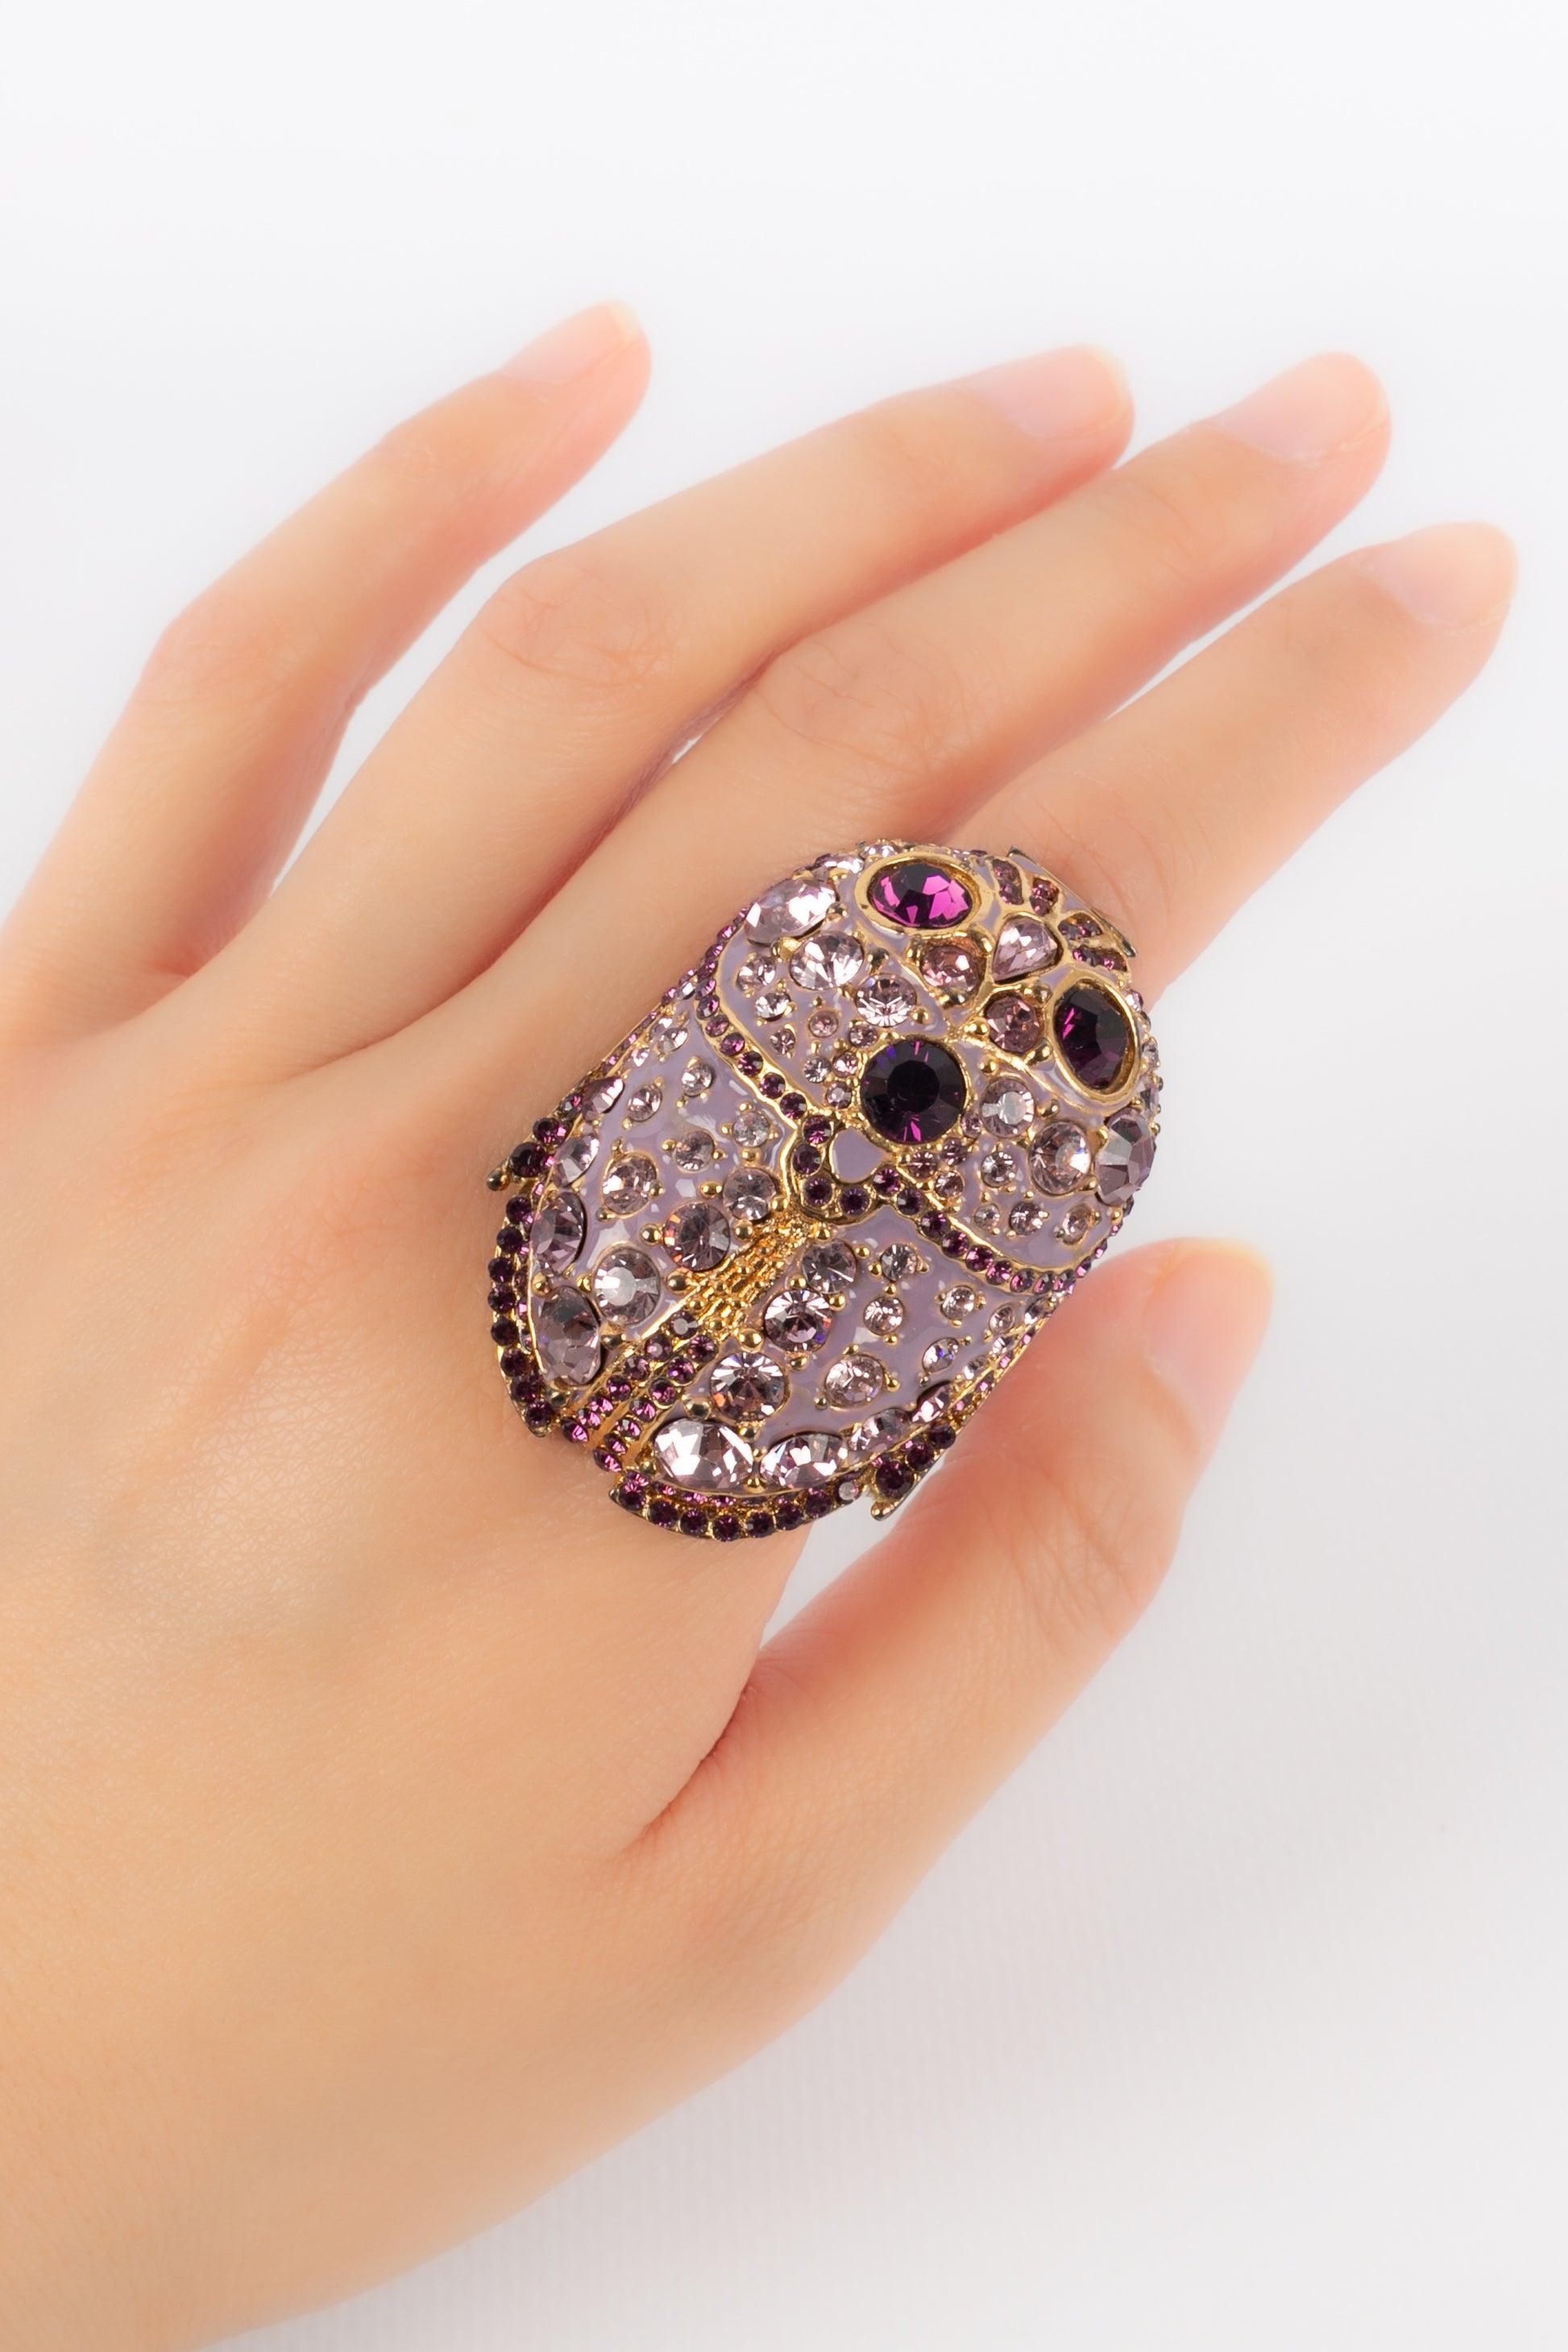 Dior - Golden metal beetle ring with purple enamel and rhinestones. 2004 Spring-Summer Haute Couture Collection. To be mentioned, a slight discoloration of the golden metal on the ring.
 
 Additional information: 
 Condition: Good condition
